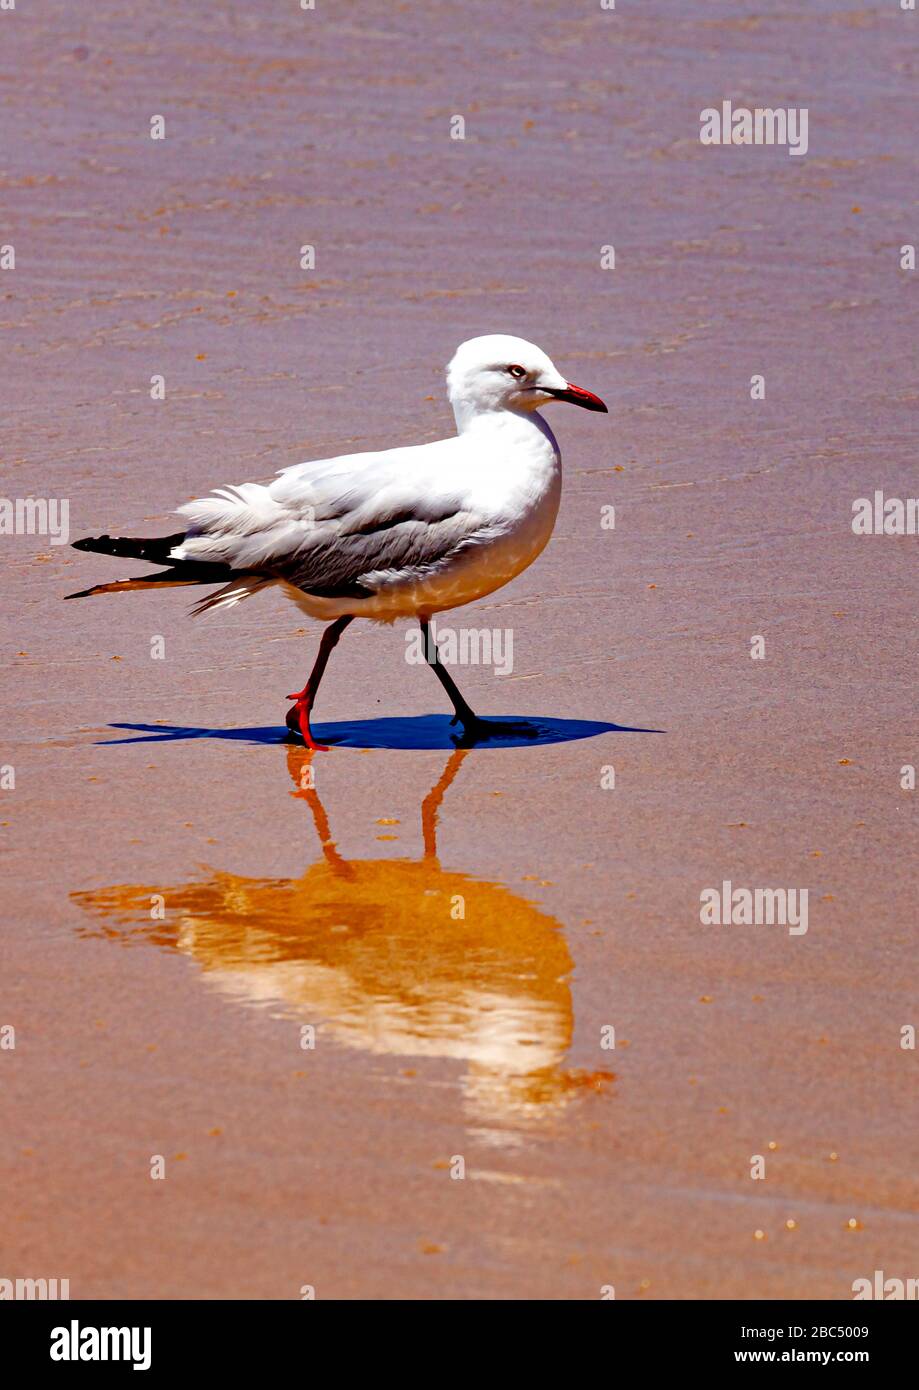 Seagull with reflection on beach at Merimbula on New South Wales south coast Stock Photo